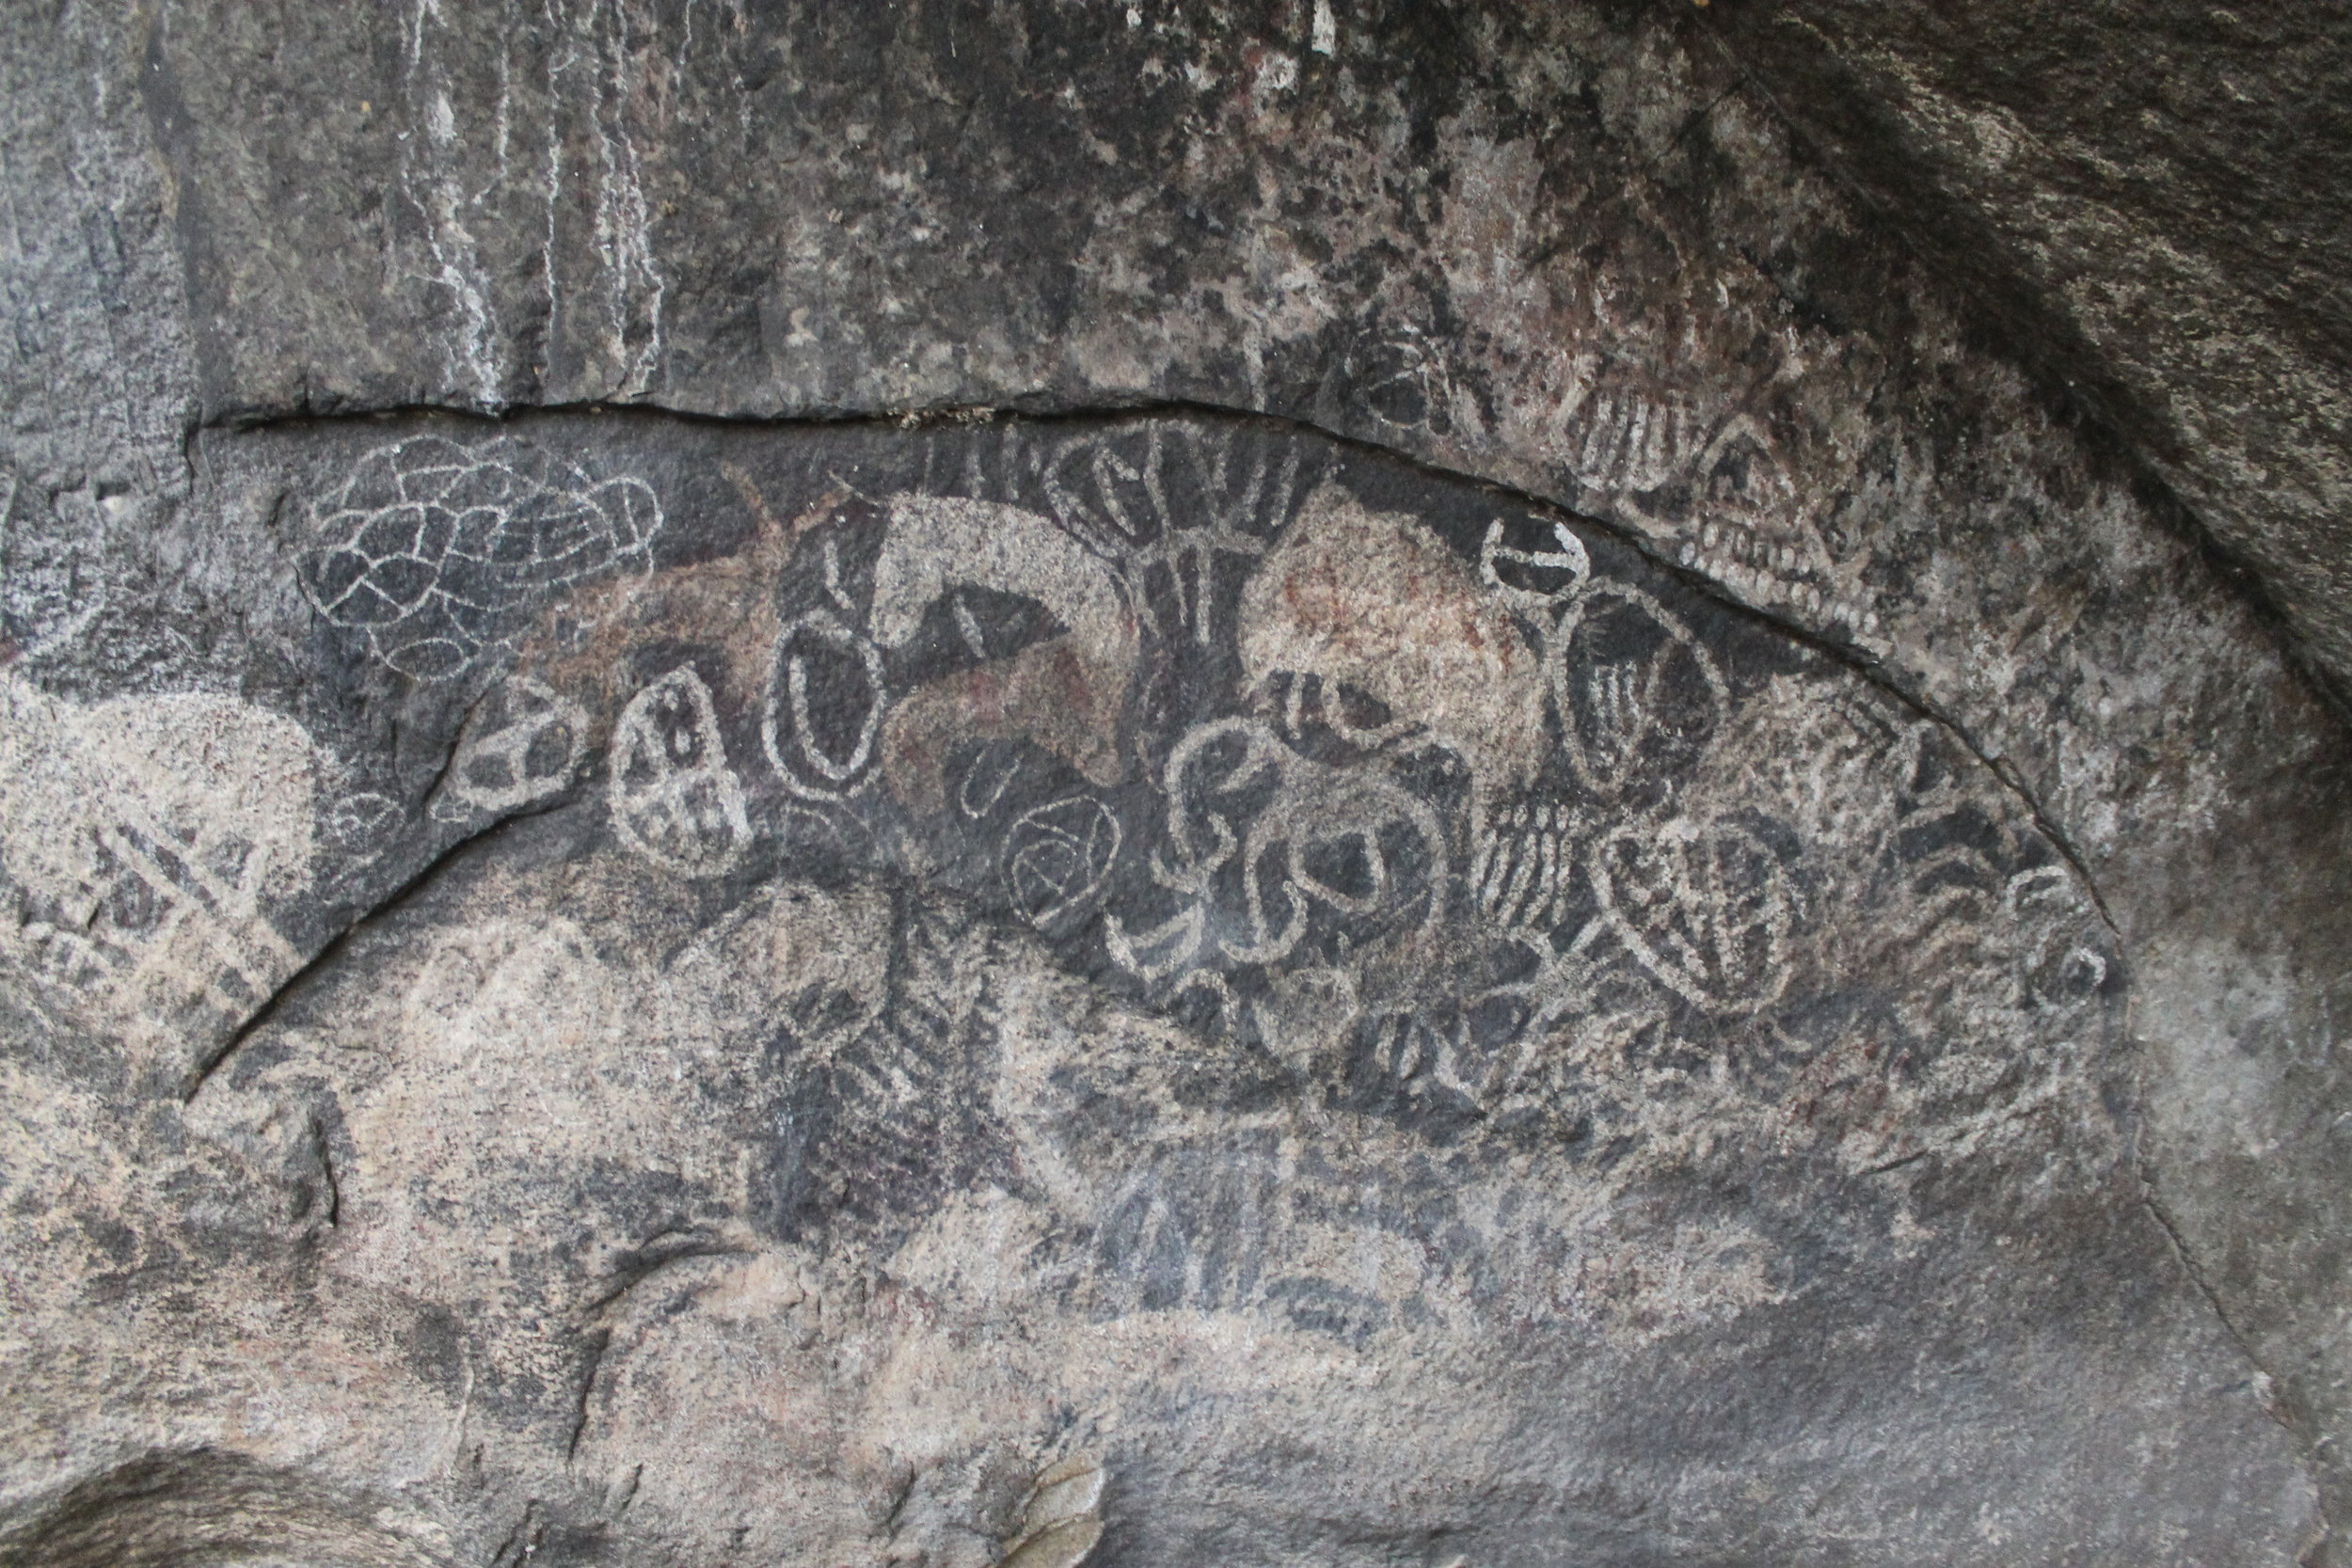 Rockart in the shelter